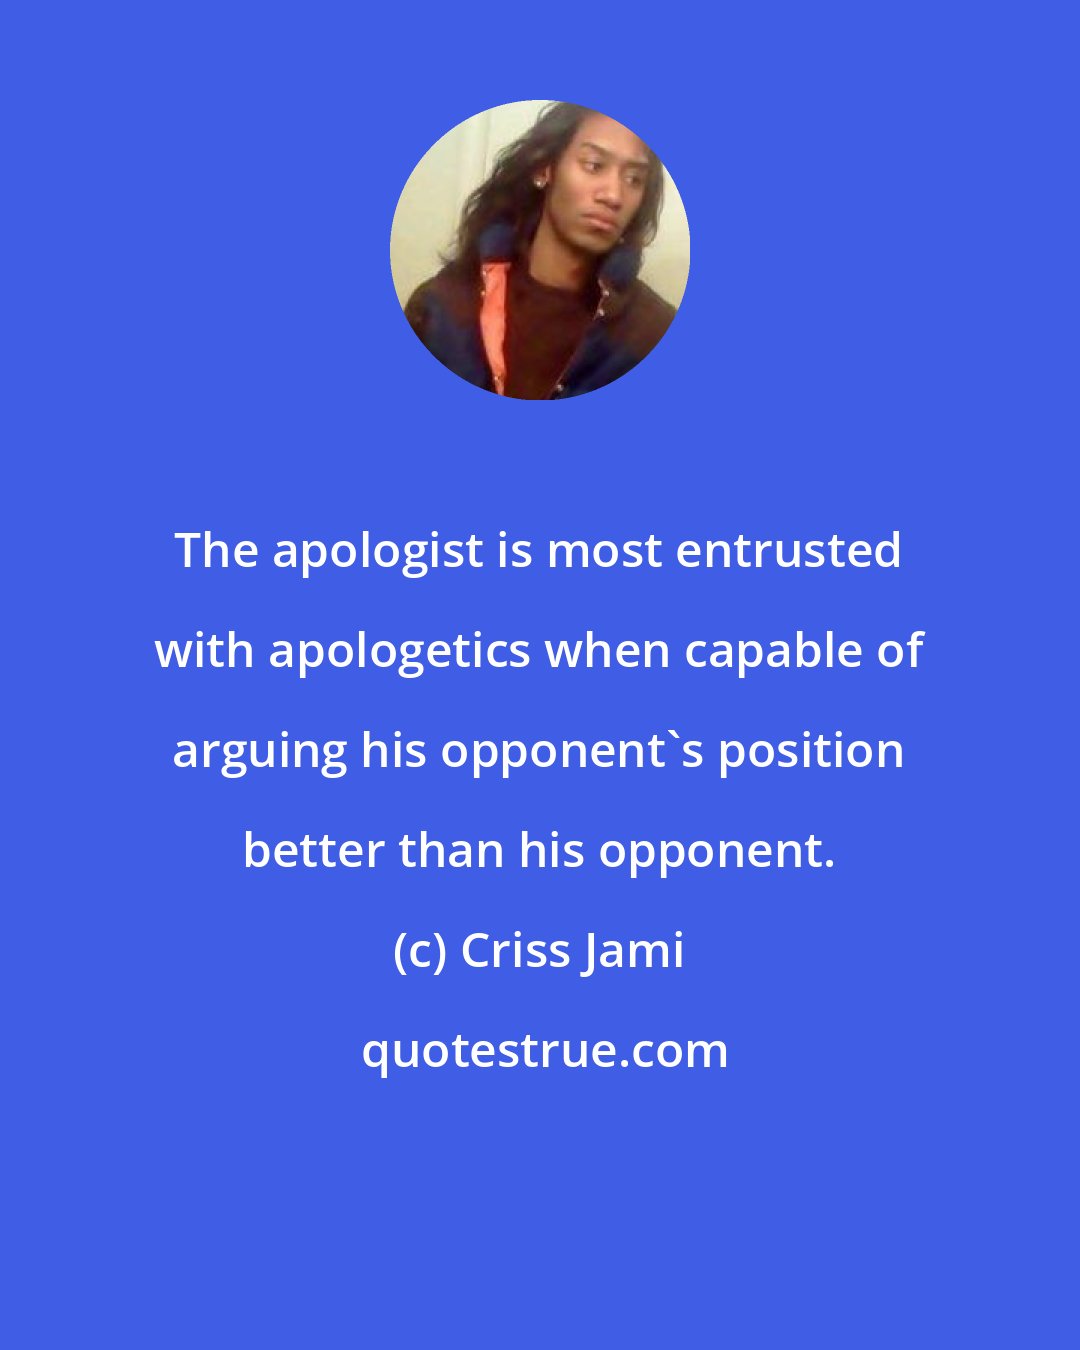 Criss Jami: The apologist is most entrusted with apologetics when capable of arguing his opponent's position better than his opponent.